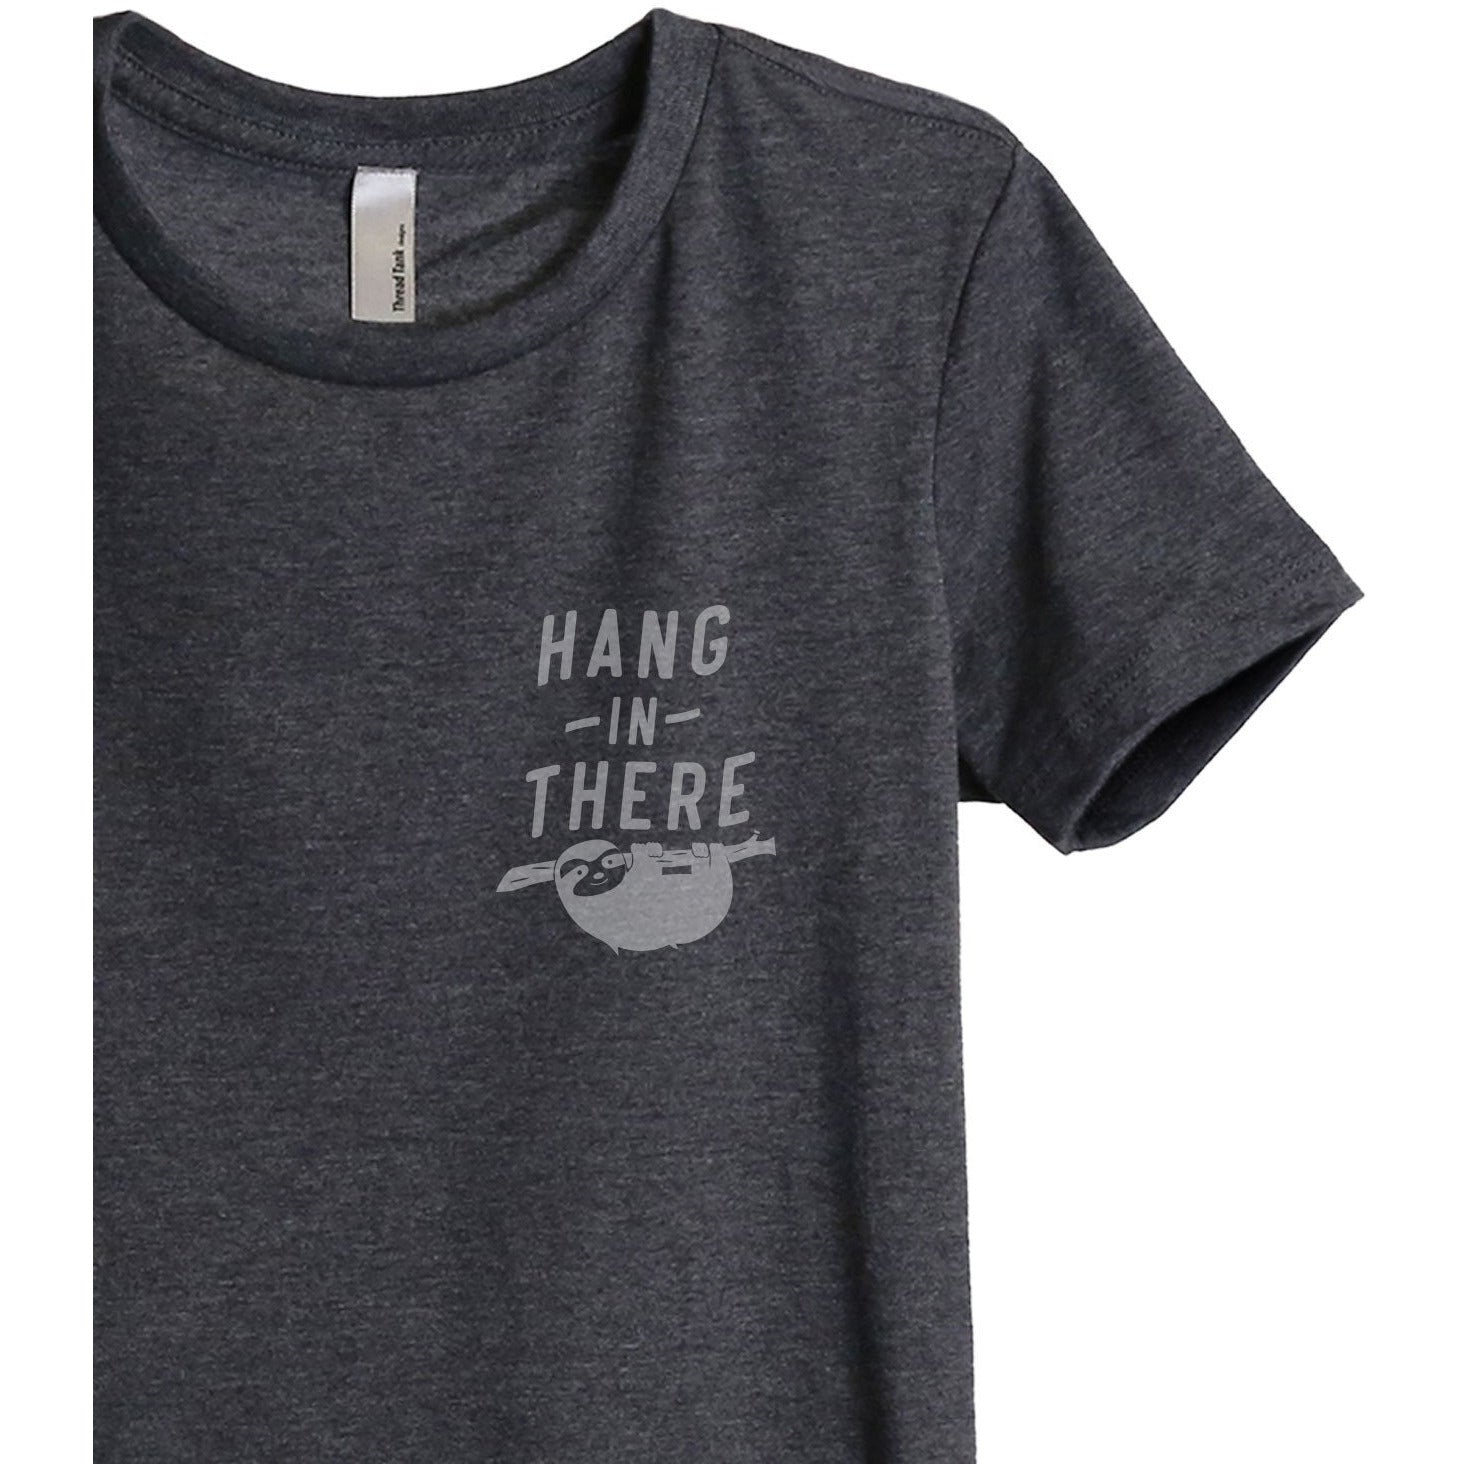 Hang In There Women's Relaxed Crewneck T-Shirt Top Tee Charcoal Grey Zoom Details